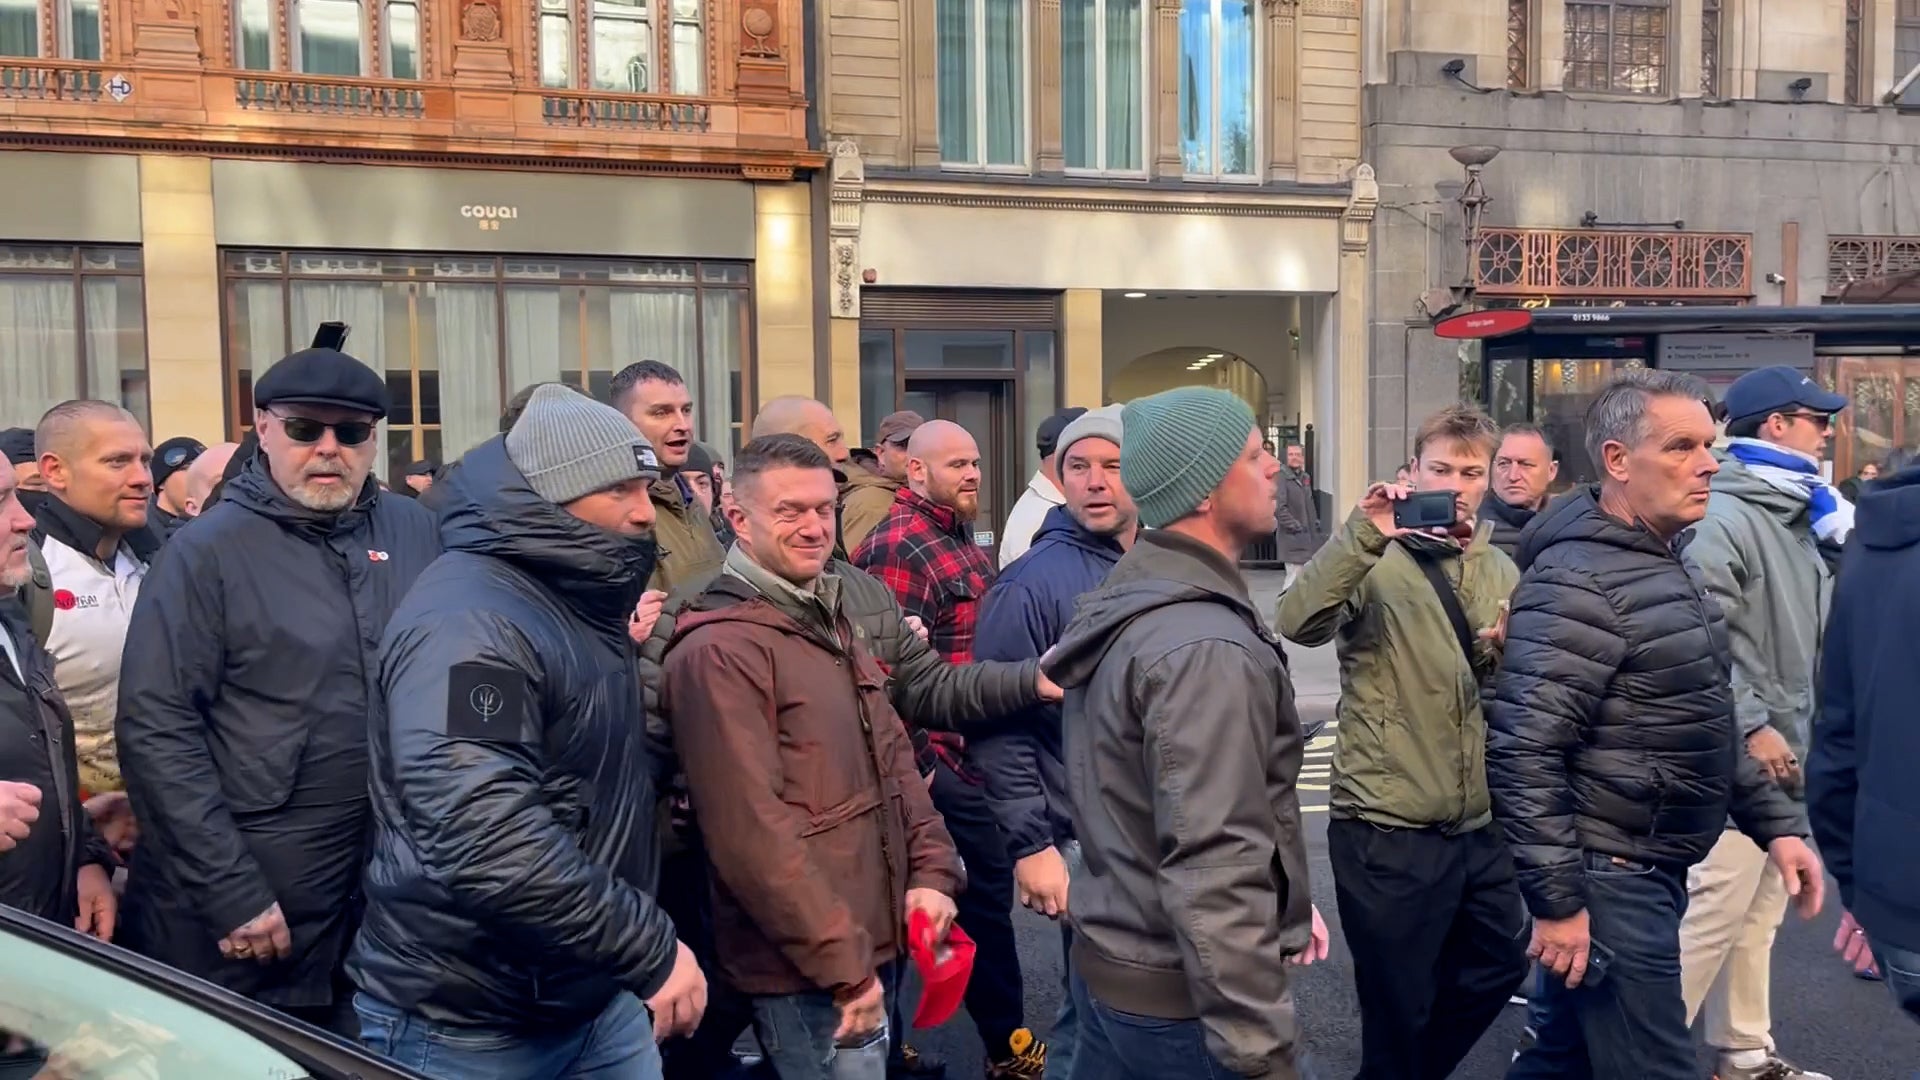 Tommy Robinson with counter protesters in London’s Chinatown on Remembrance weekend